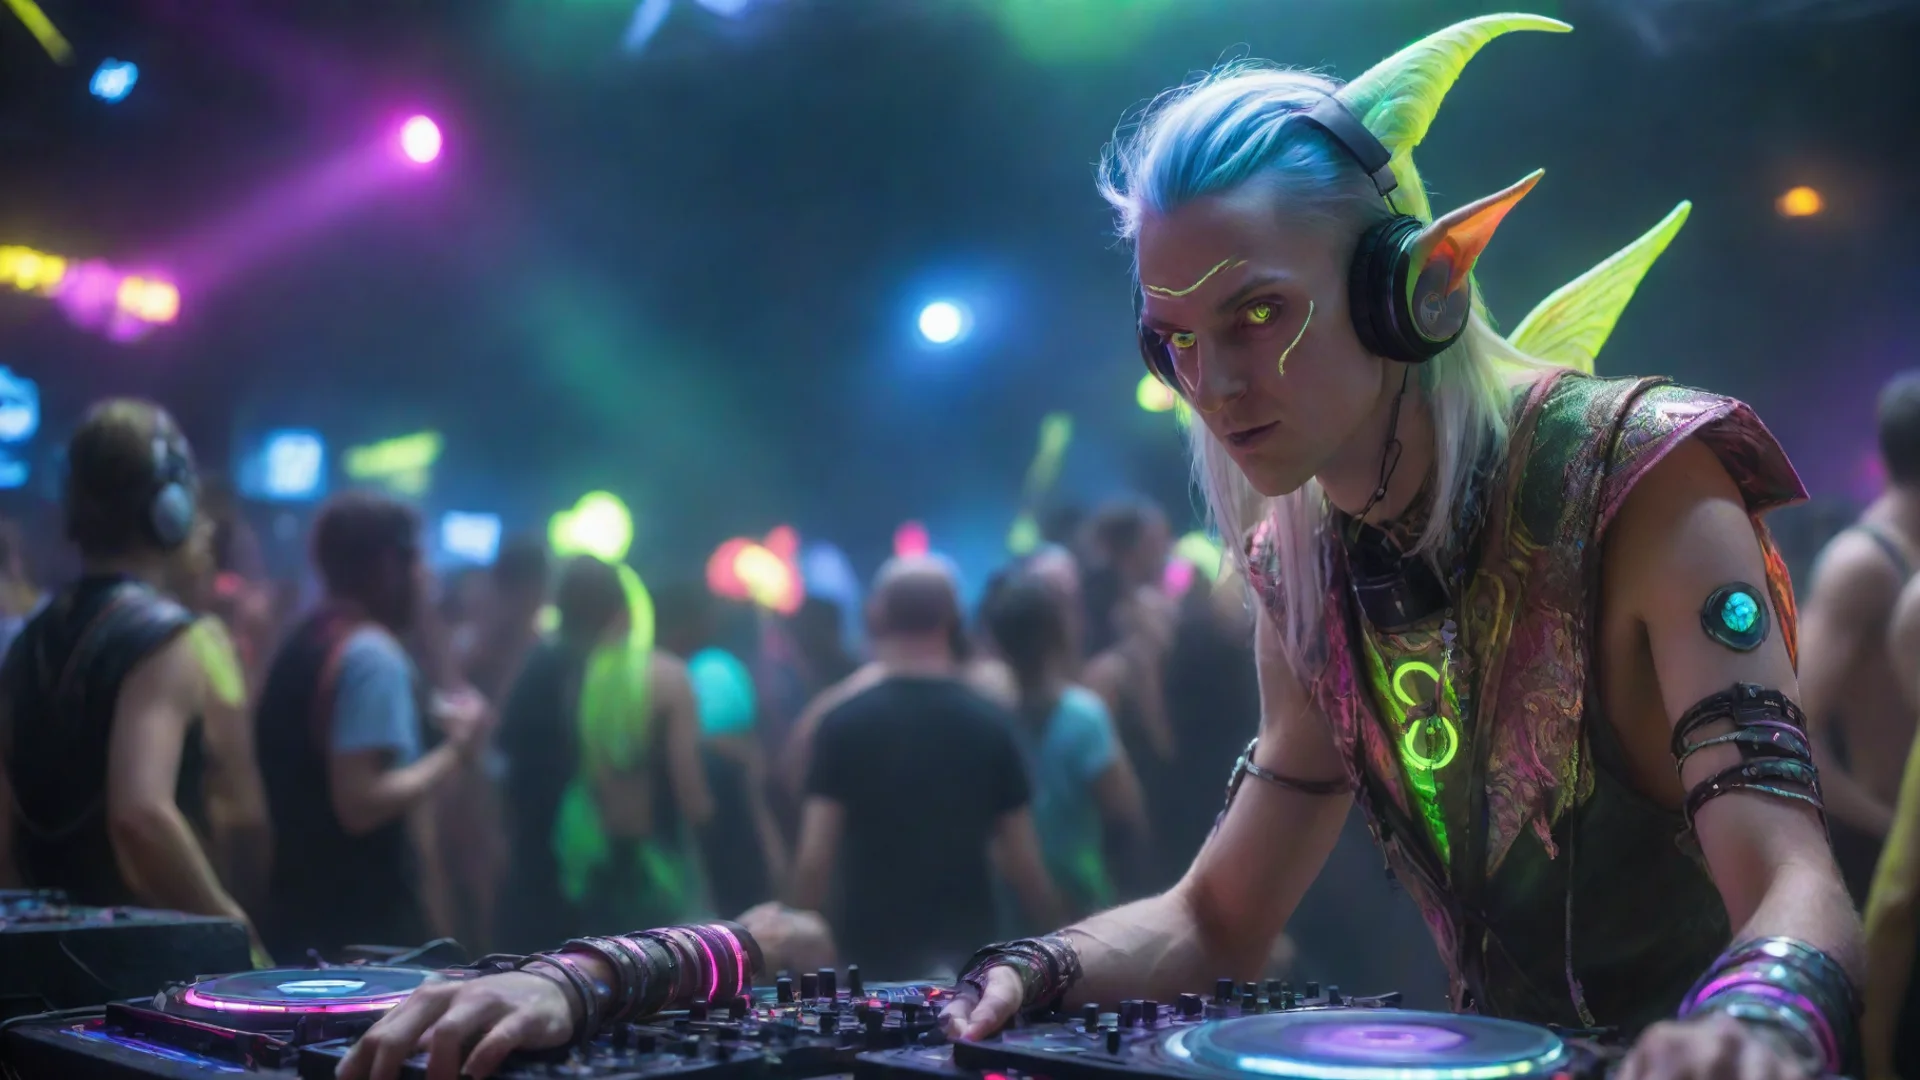 trending high elf dj at a rave with lots of fluorescent elements good looking fantastic 1 wide